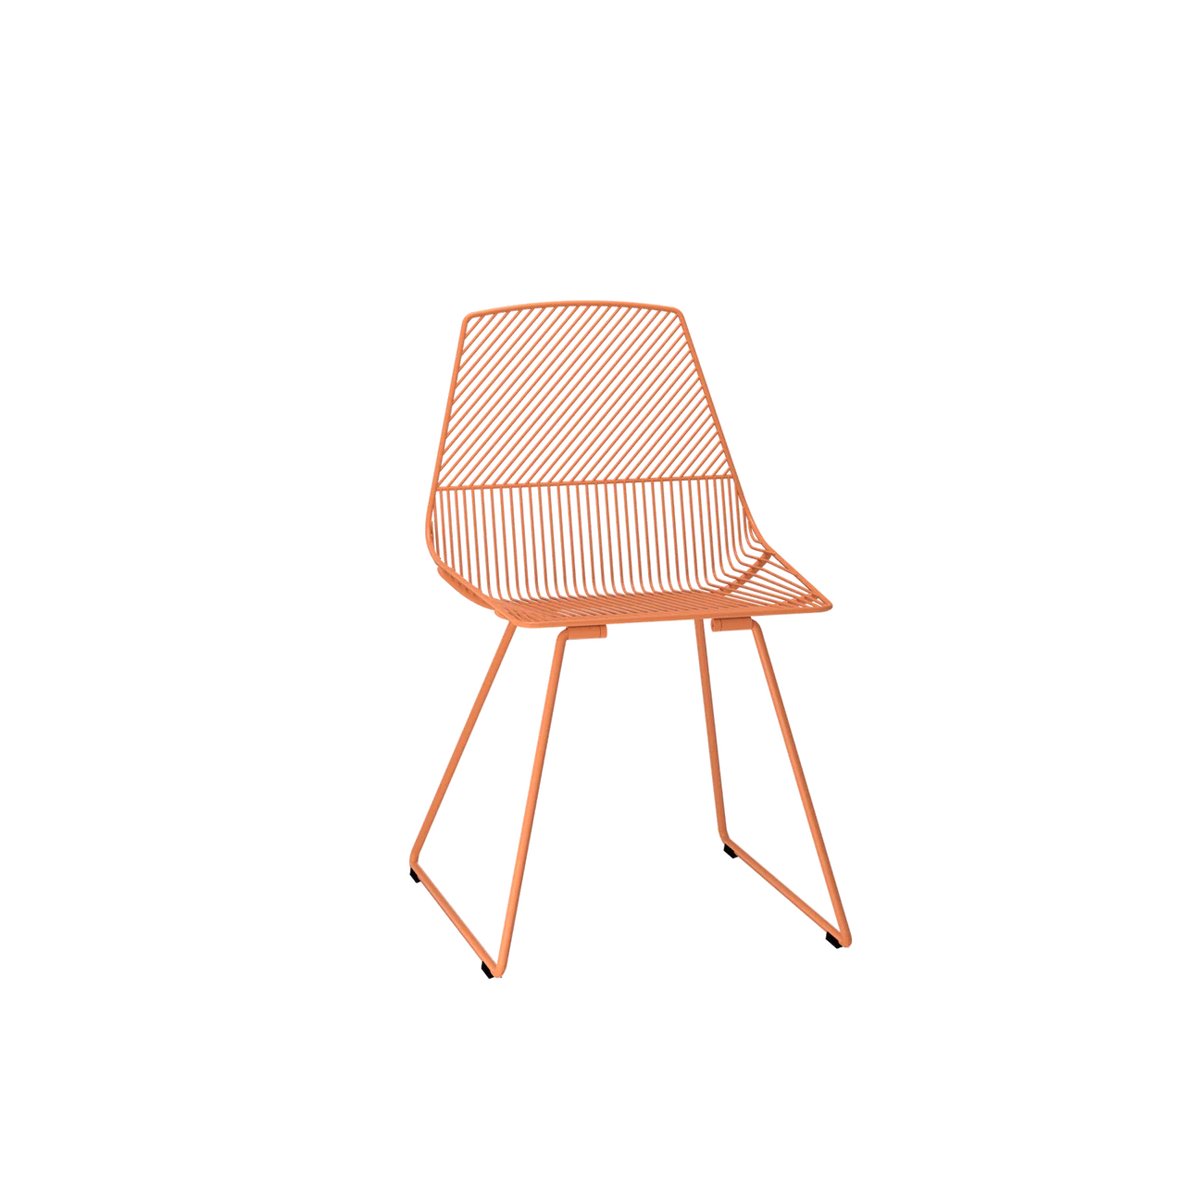 Ethel Chair by Bend Goods (Made in the USA)